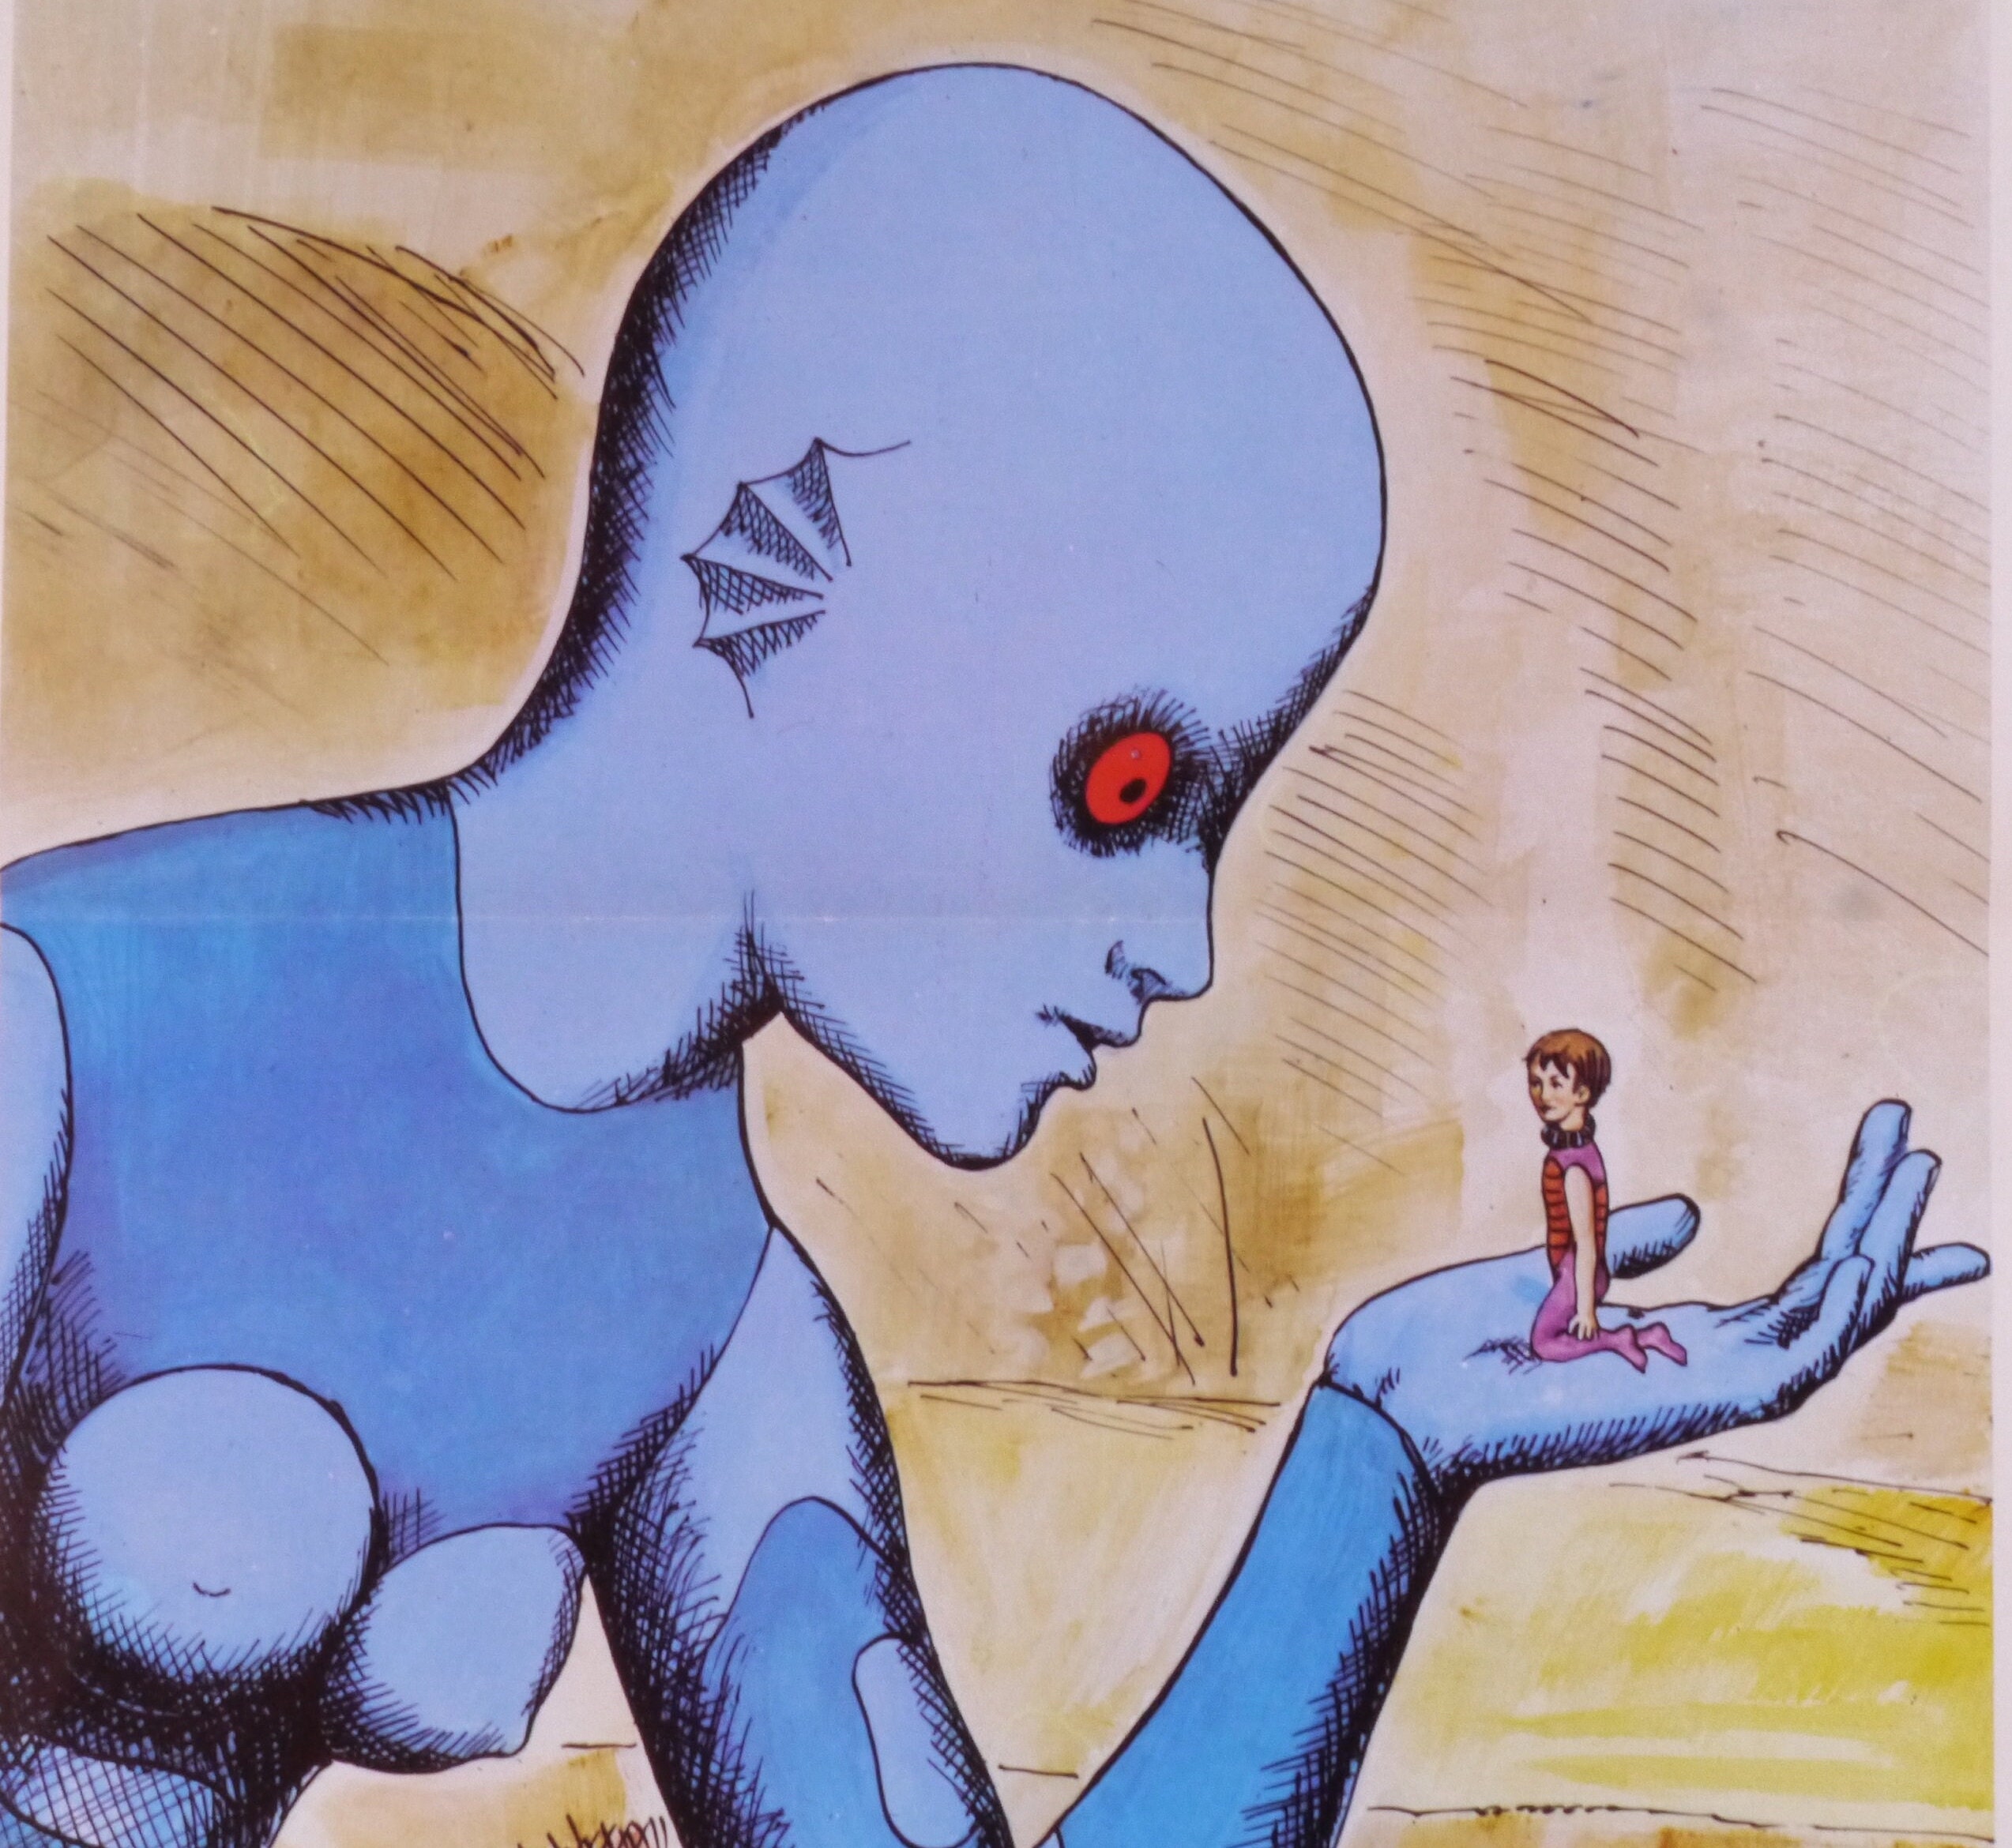 Fantastic Planet-An Original Vintage Italian Movie Poster for Rene Laloux's Mind-Bending Sci-Fi Adventure with Cynthia Adler and Max Amyl